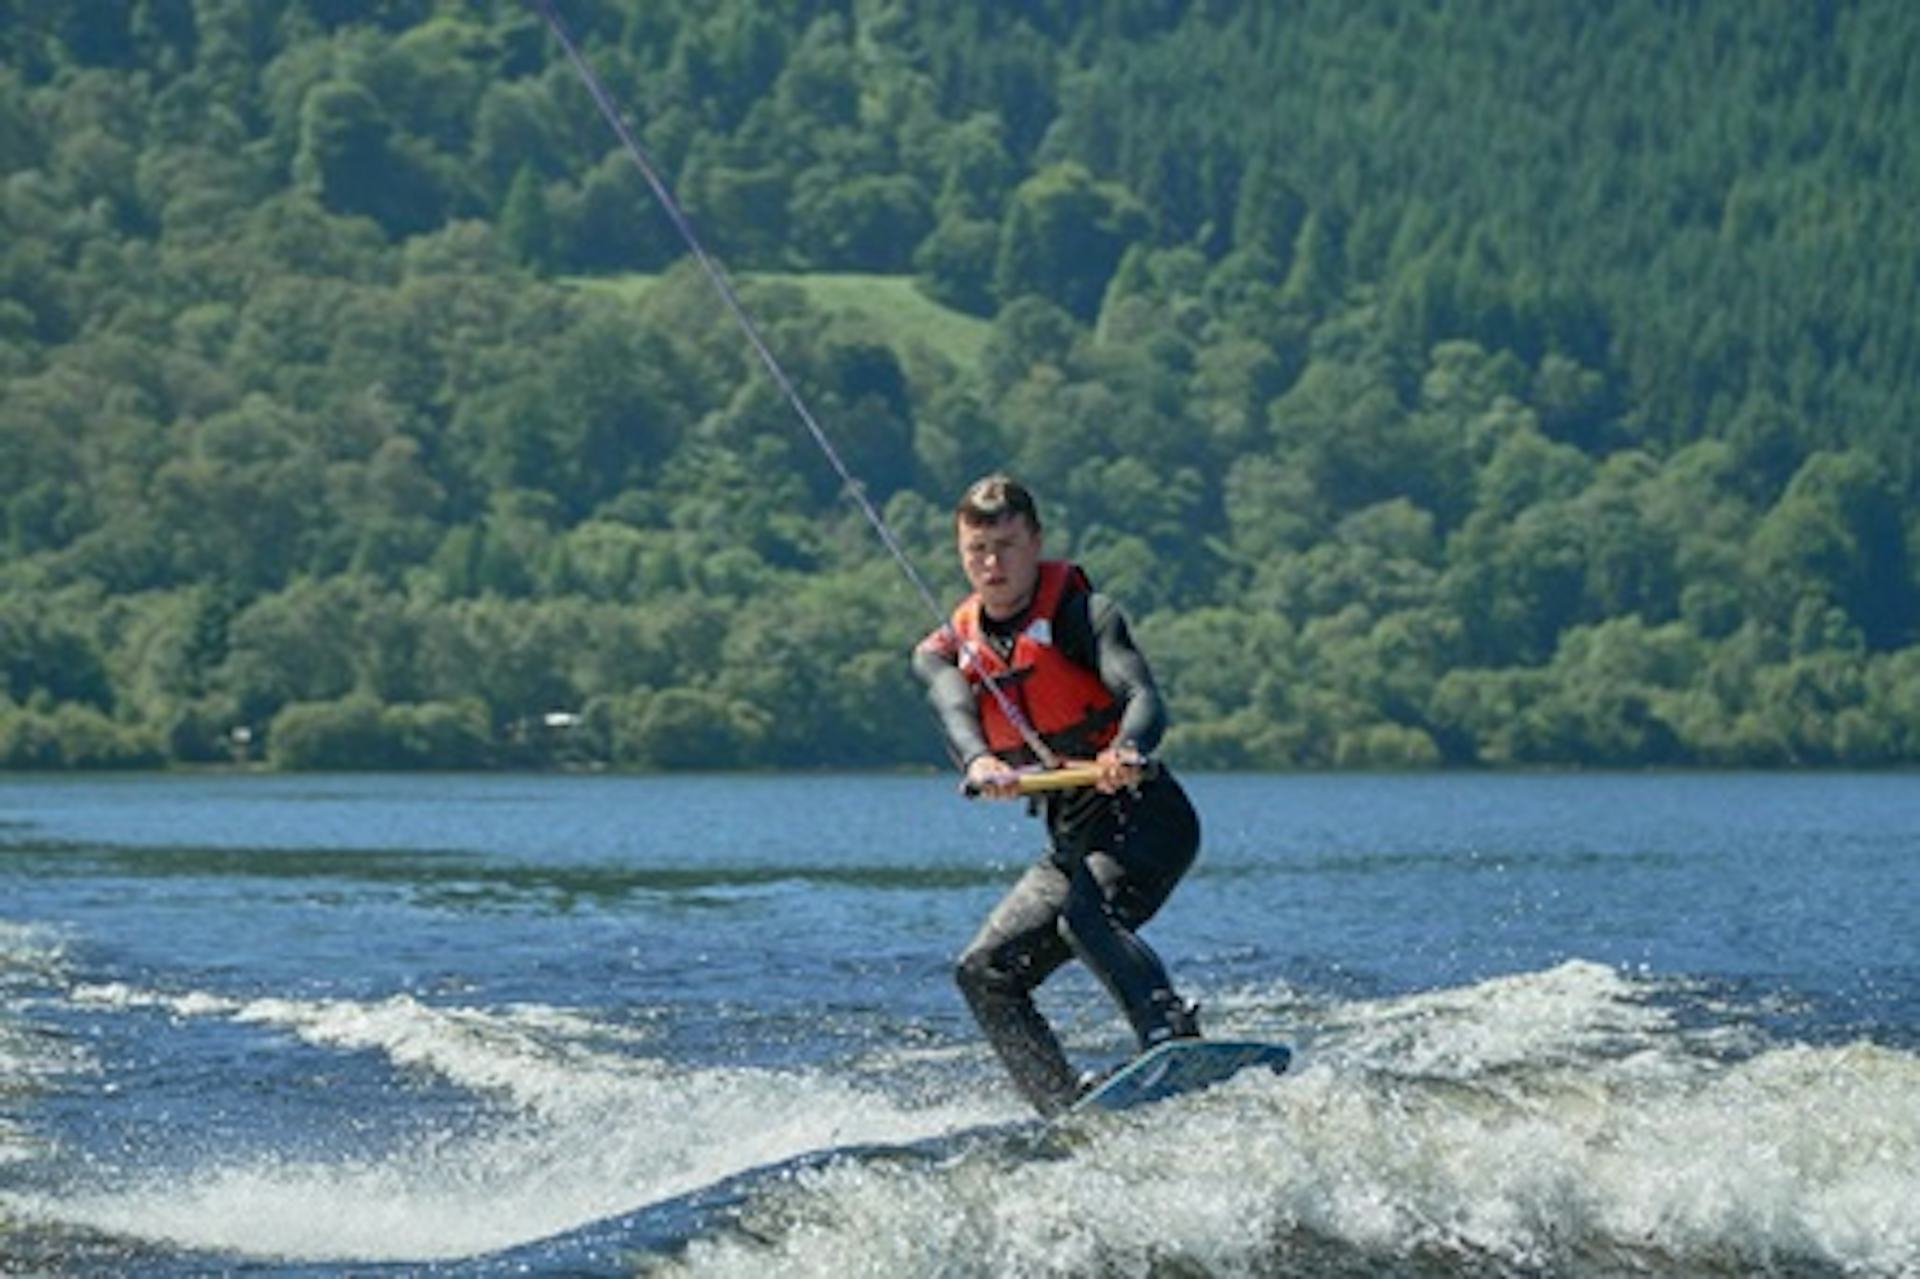 Introductory Wakeboarding on Loch Lomond